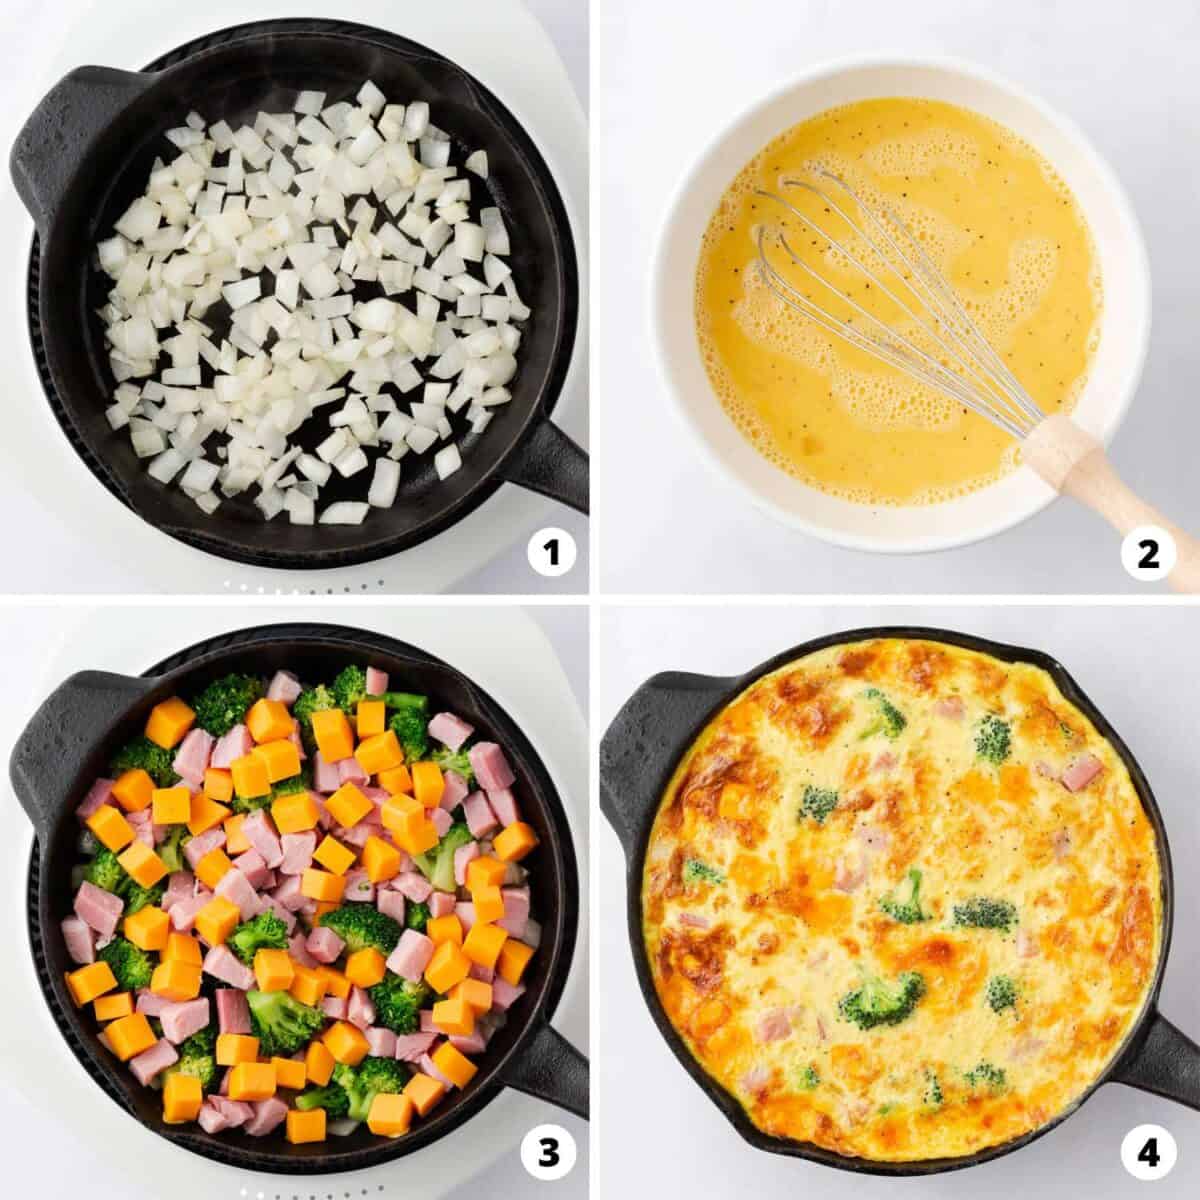 Showing how to make a frittata in a 4 step collage.